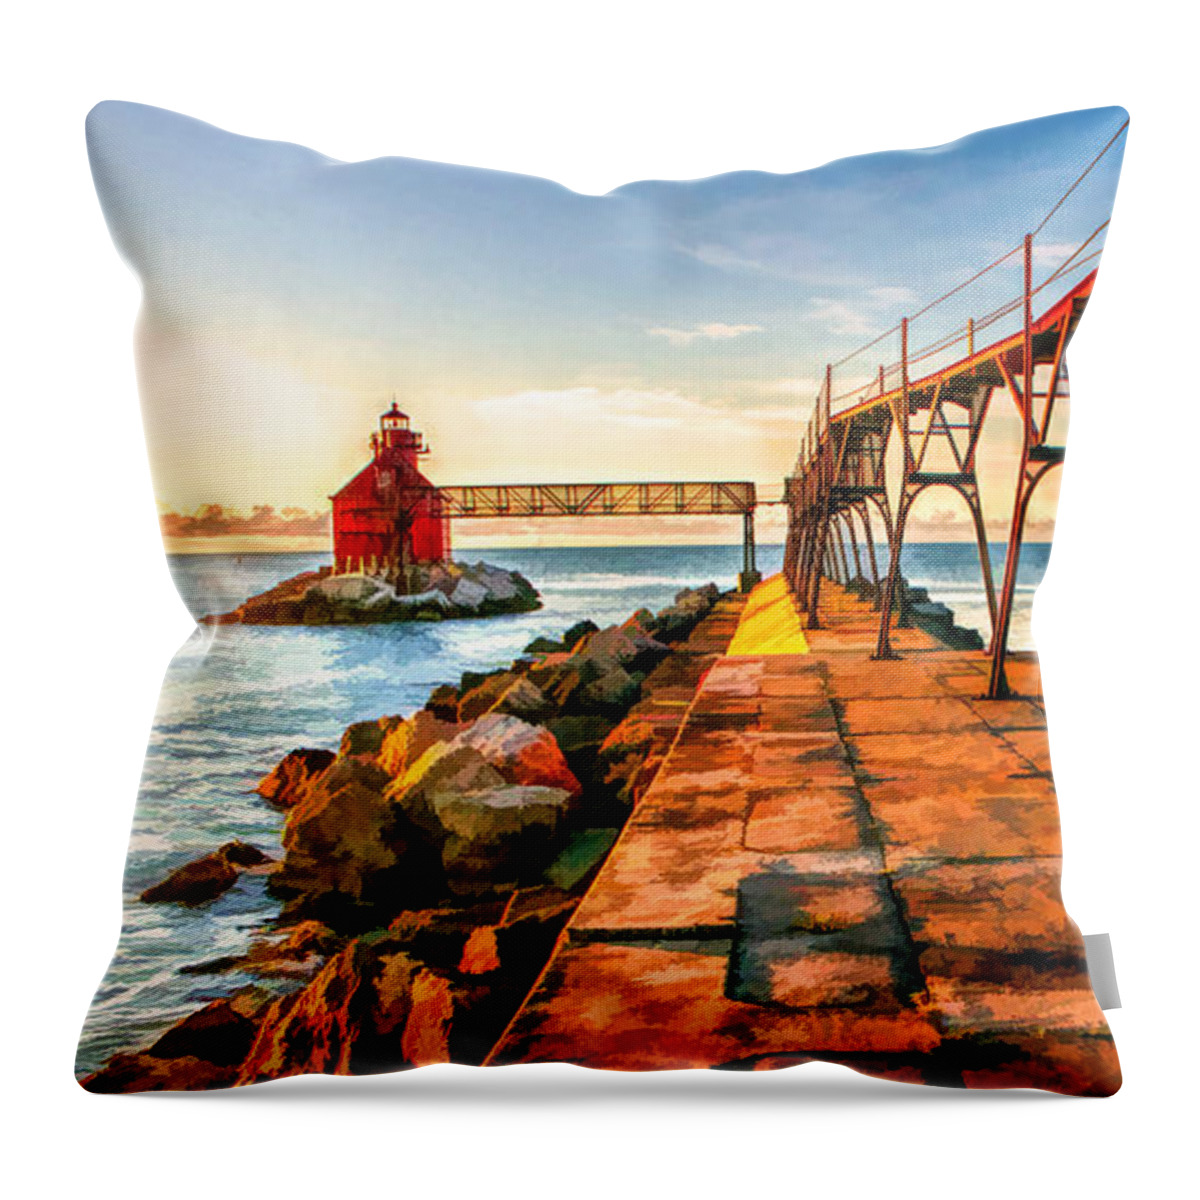 Door County Throw Pillow featuring the painting Sturgeon Bay Canal Pierhead Light by Christopher Arndt